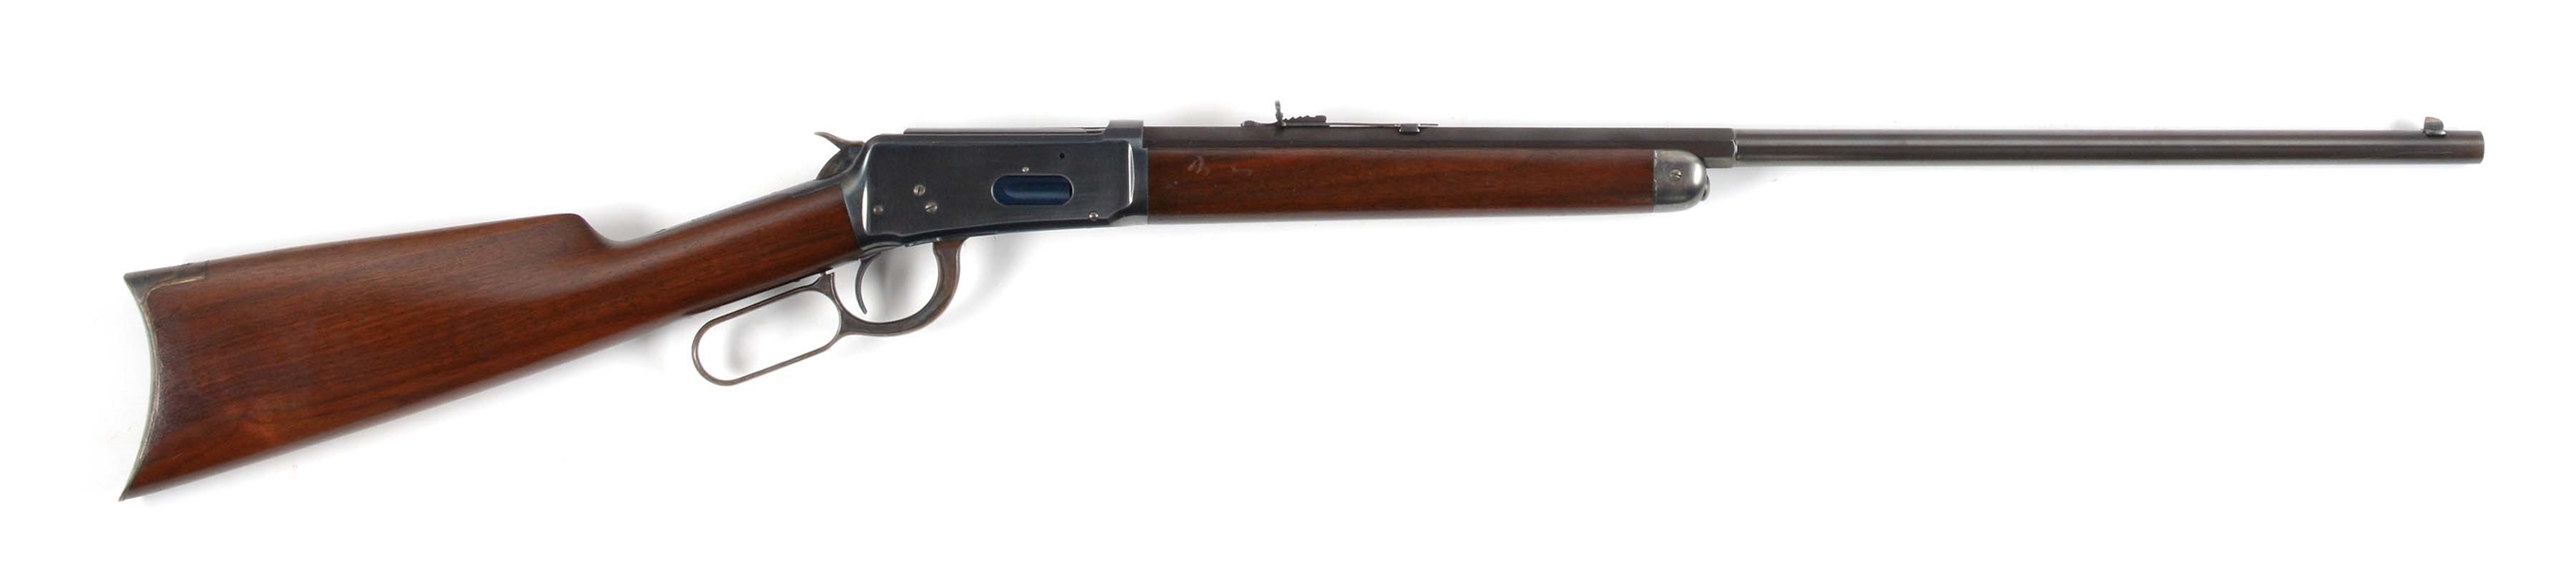 (C) WINCHESTER 1894 LEVER ACTION RIFLE.